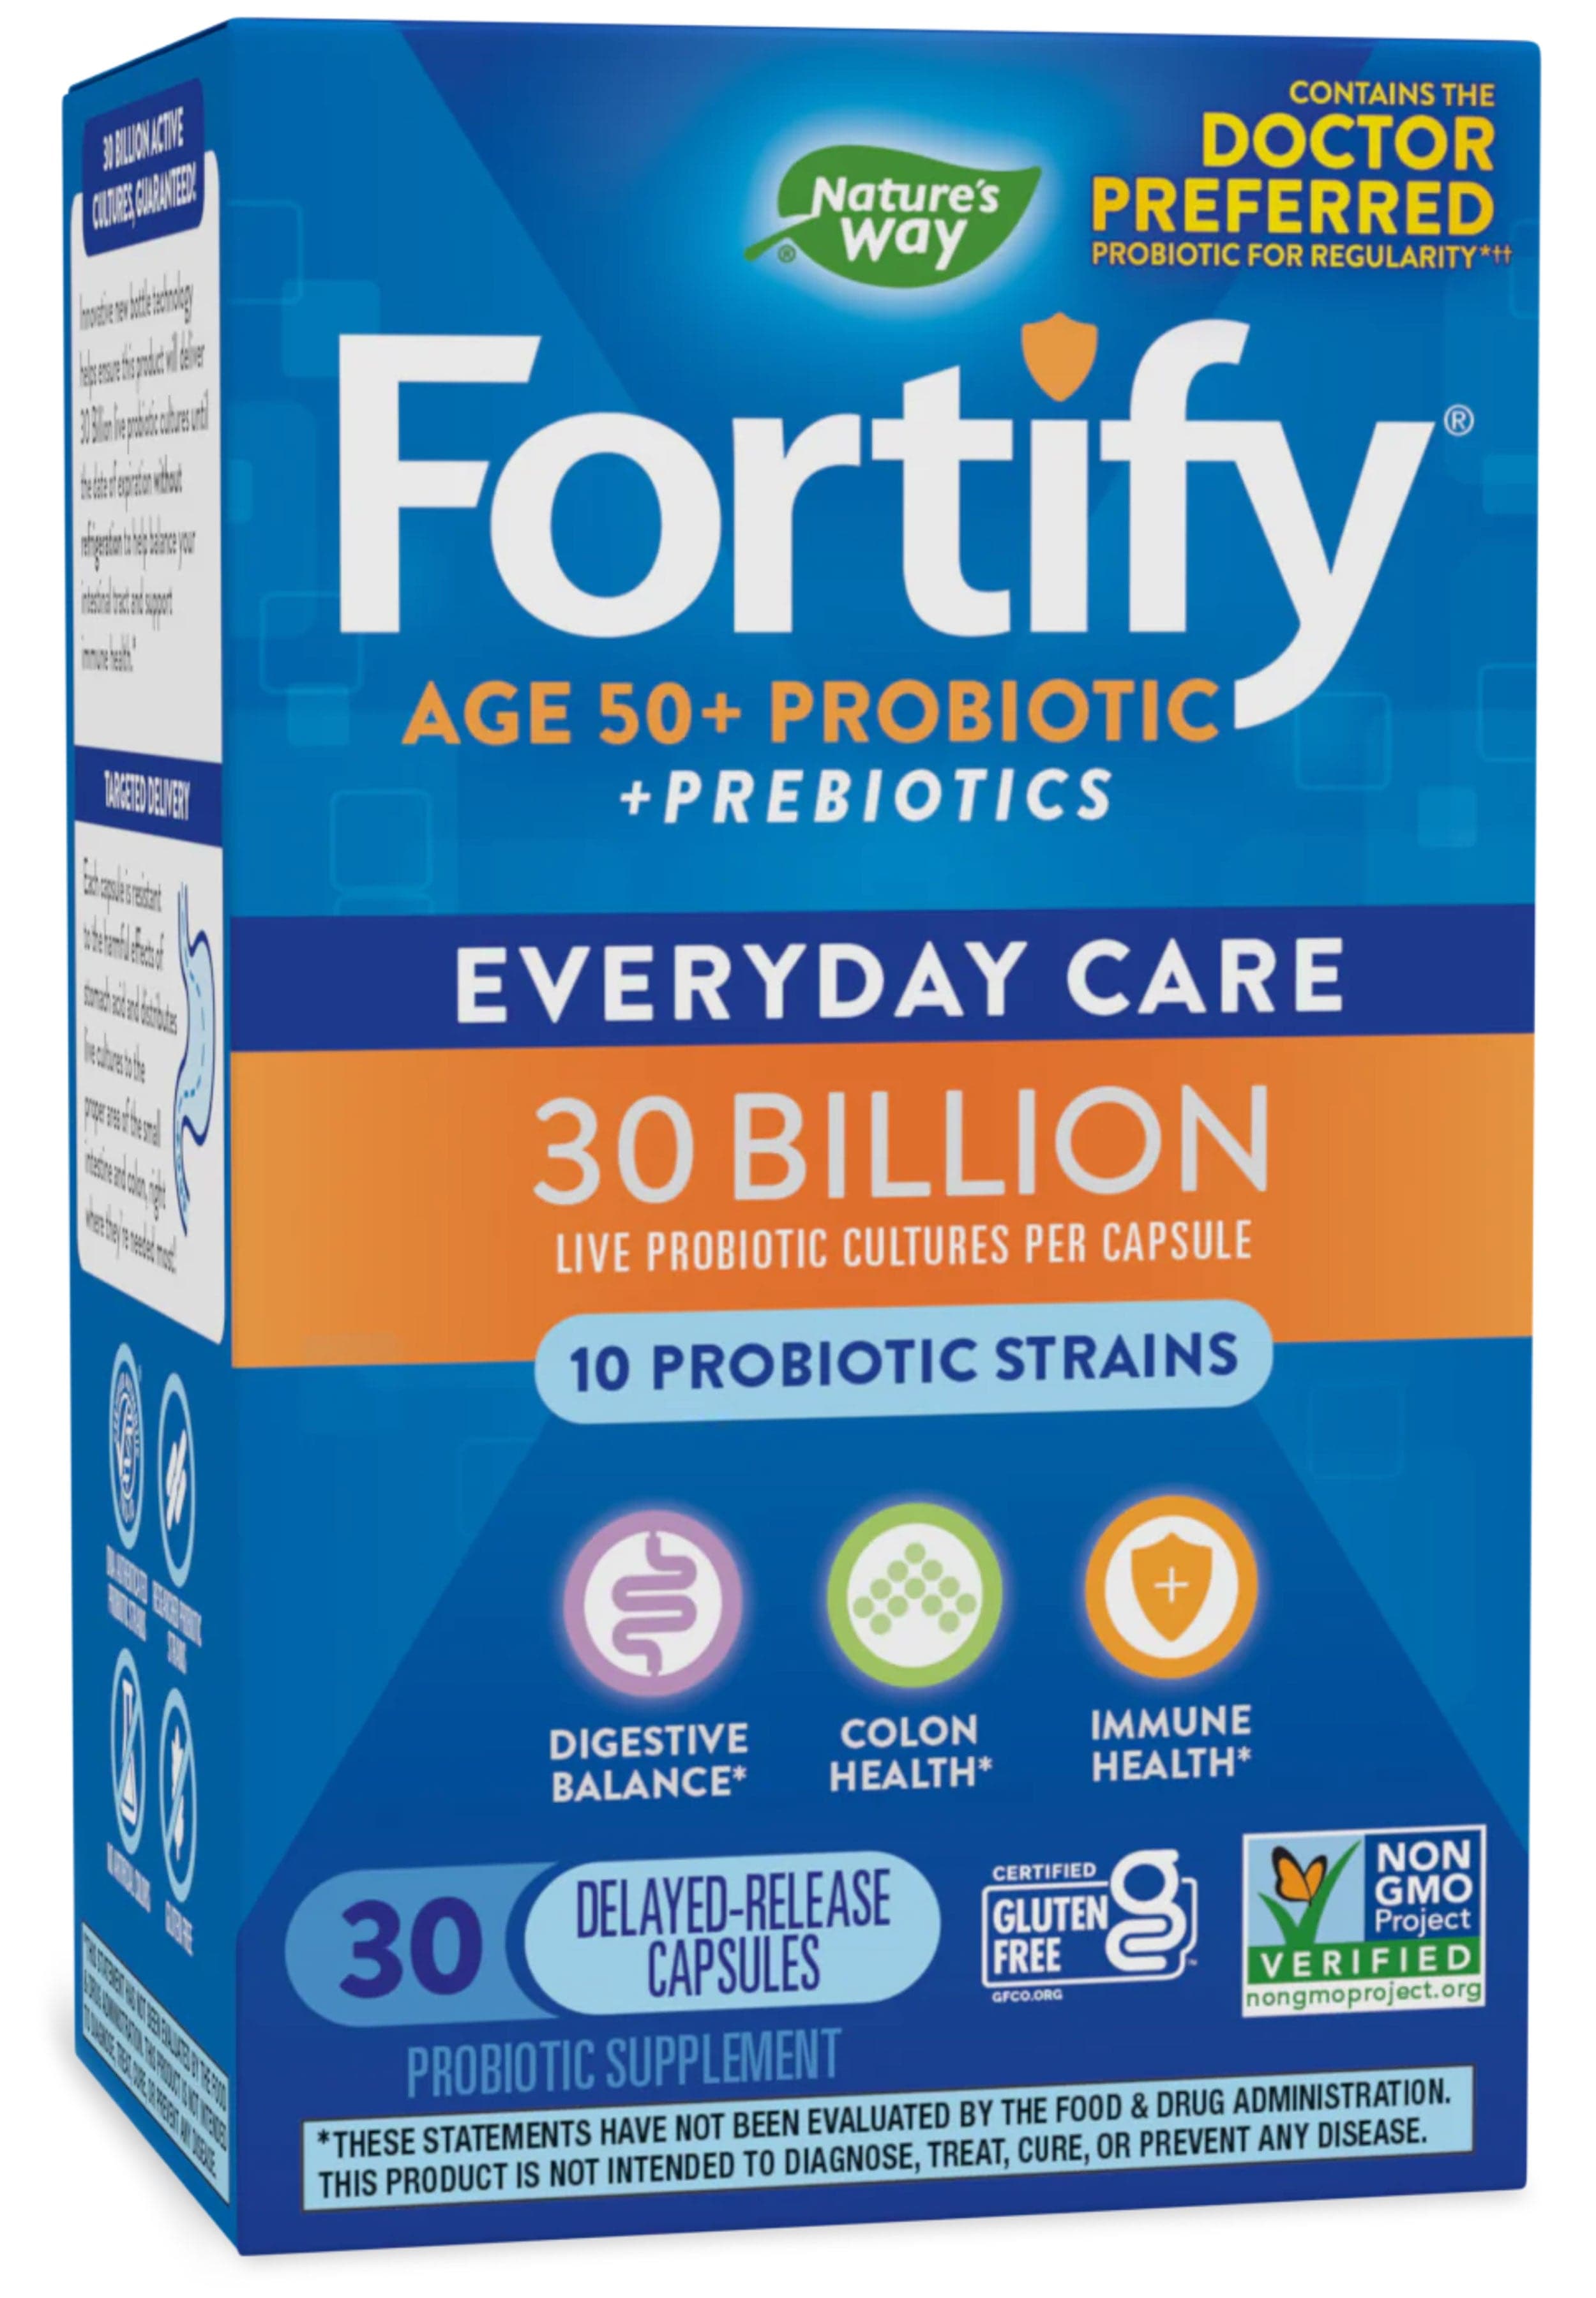 Nature's Way Fortify 50+ Probiotic 30 Billion